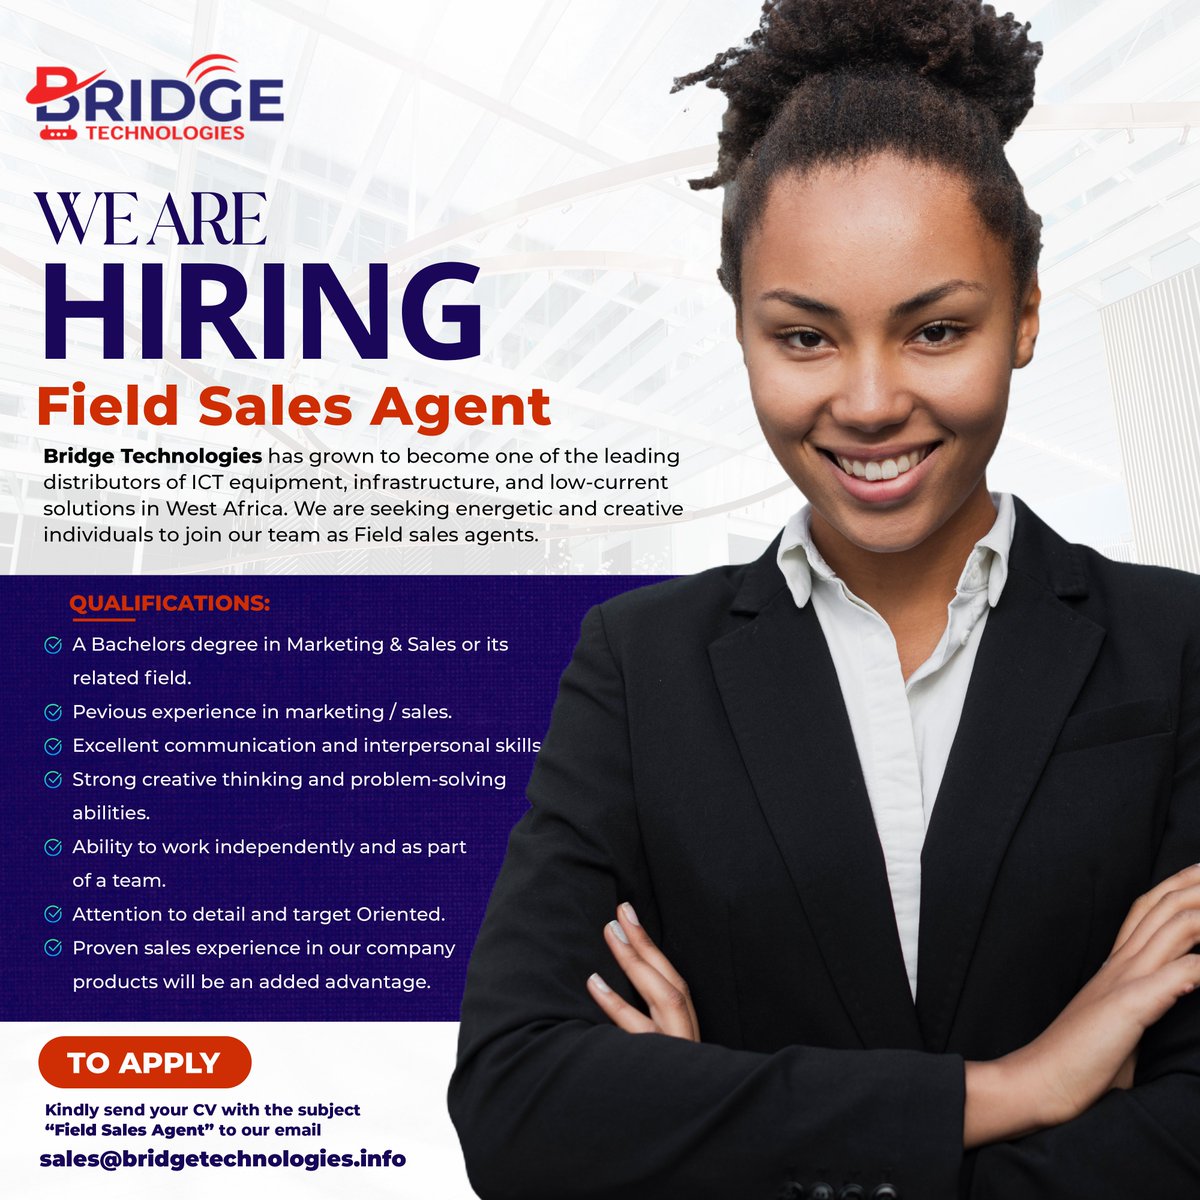 JOB OPPORTUNITY!
Are you an energetic and creative individual ready to embark on an exciting journey? Join our dynamic team as a Field Sales Agent.

Send your CV to sales@bridgetechnologies.info with the subject 'Field Sales Agent' to apply.

#BridgeTechnologies #JobOpportunity